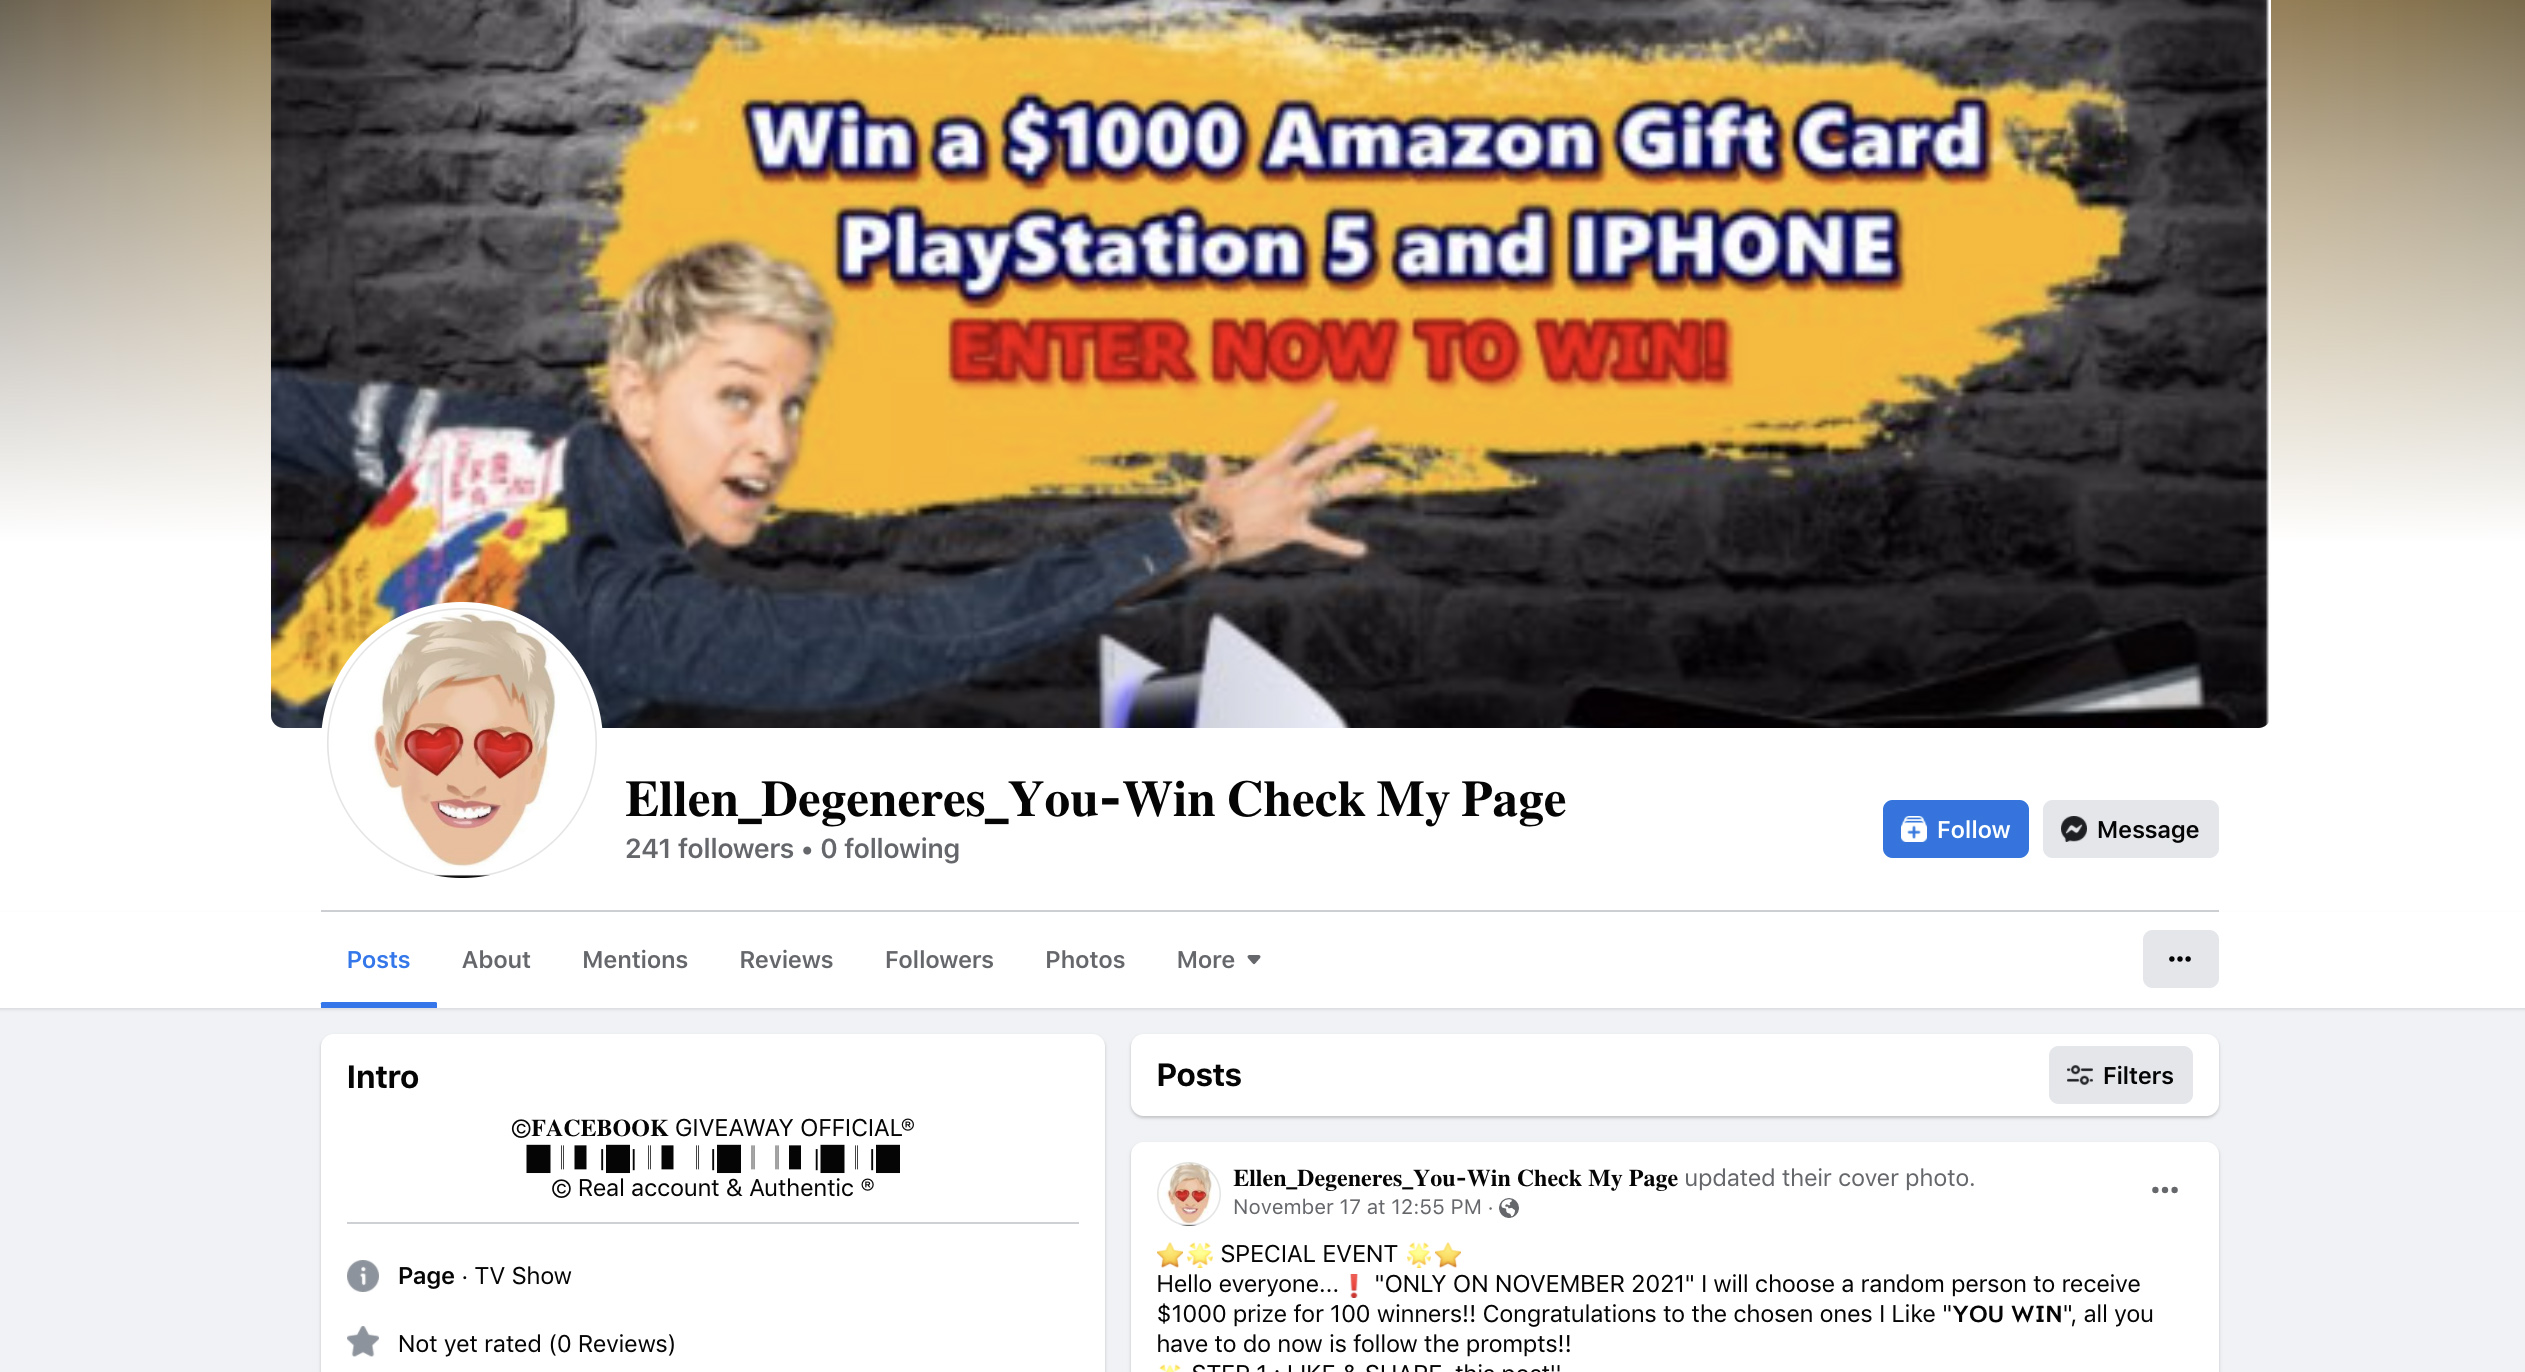 The Ellen DeGeneres Show is not giving away $1,000 Amazon gift cards or PlayStation 5 consoles or iPhone devices on Facebook.